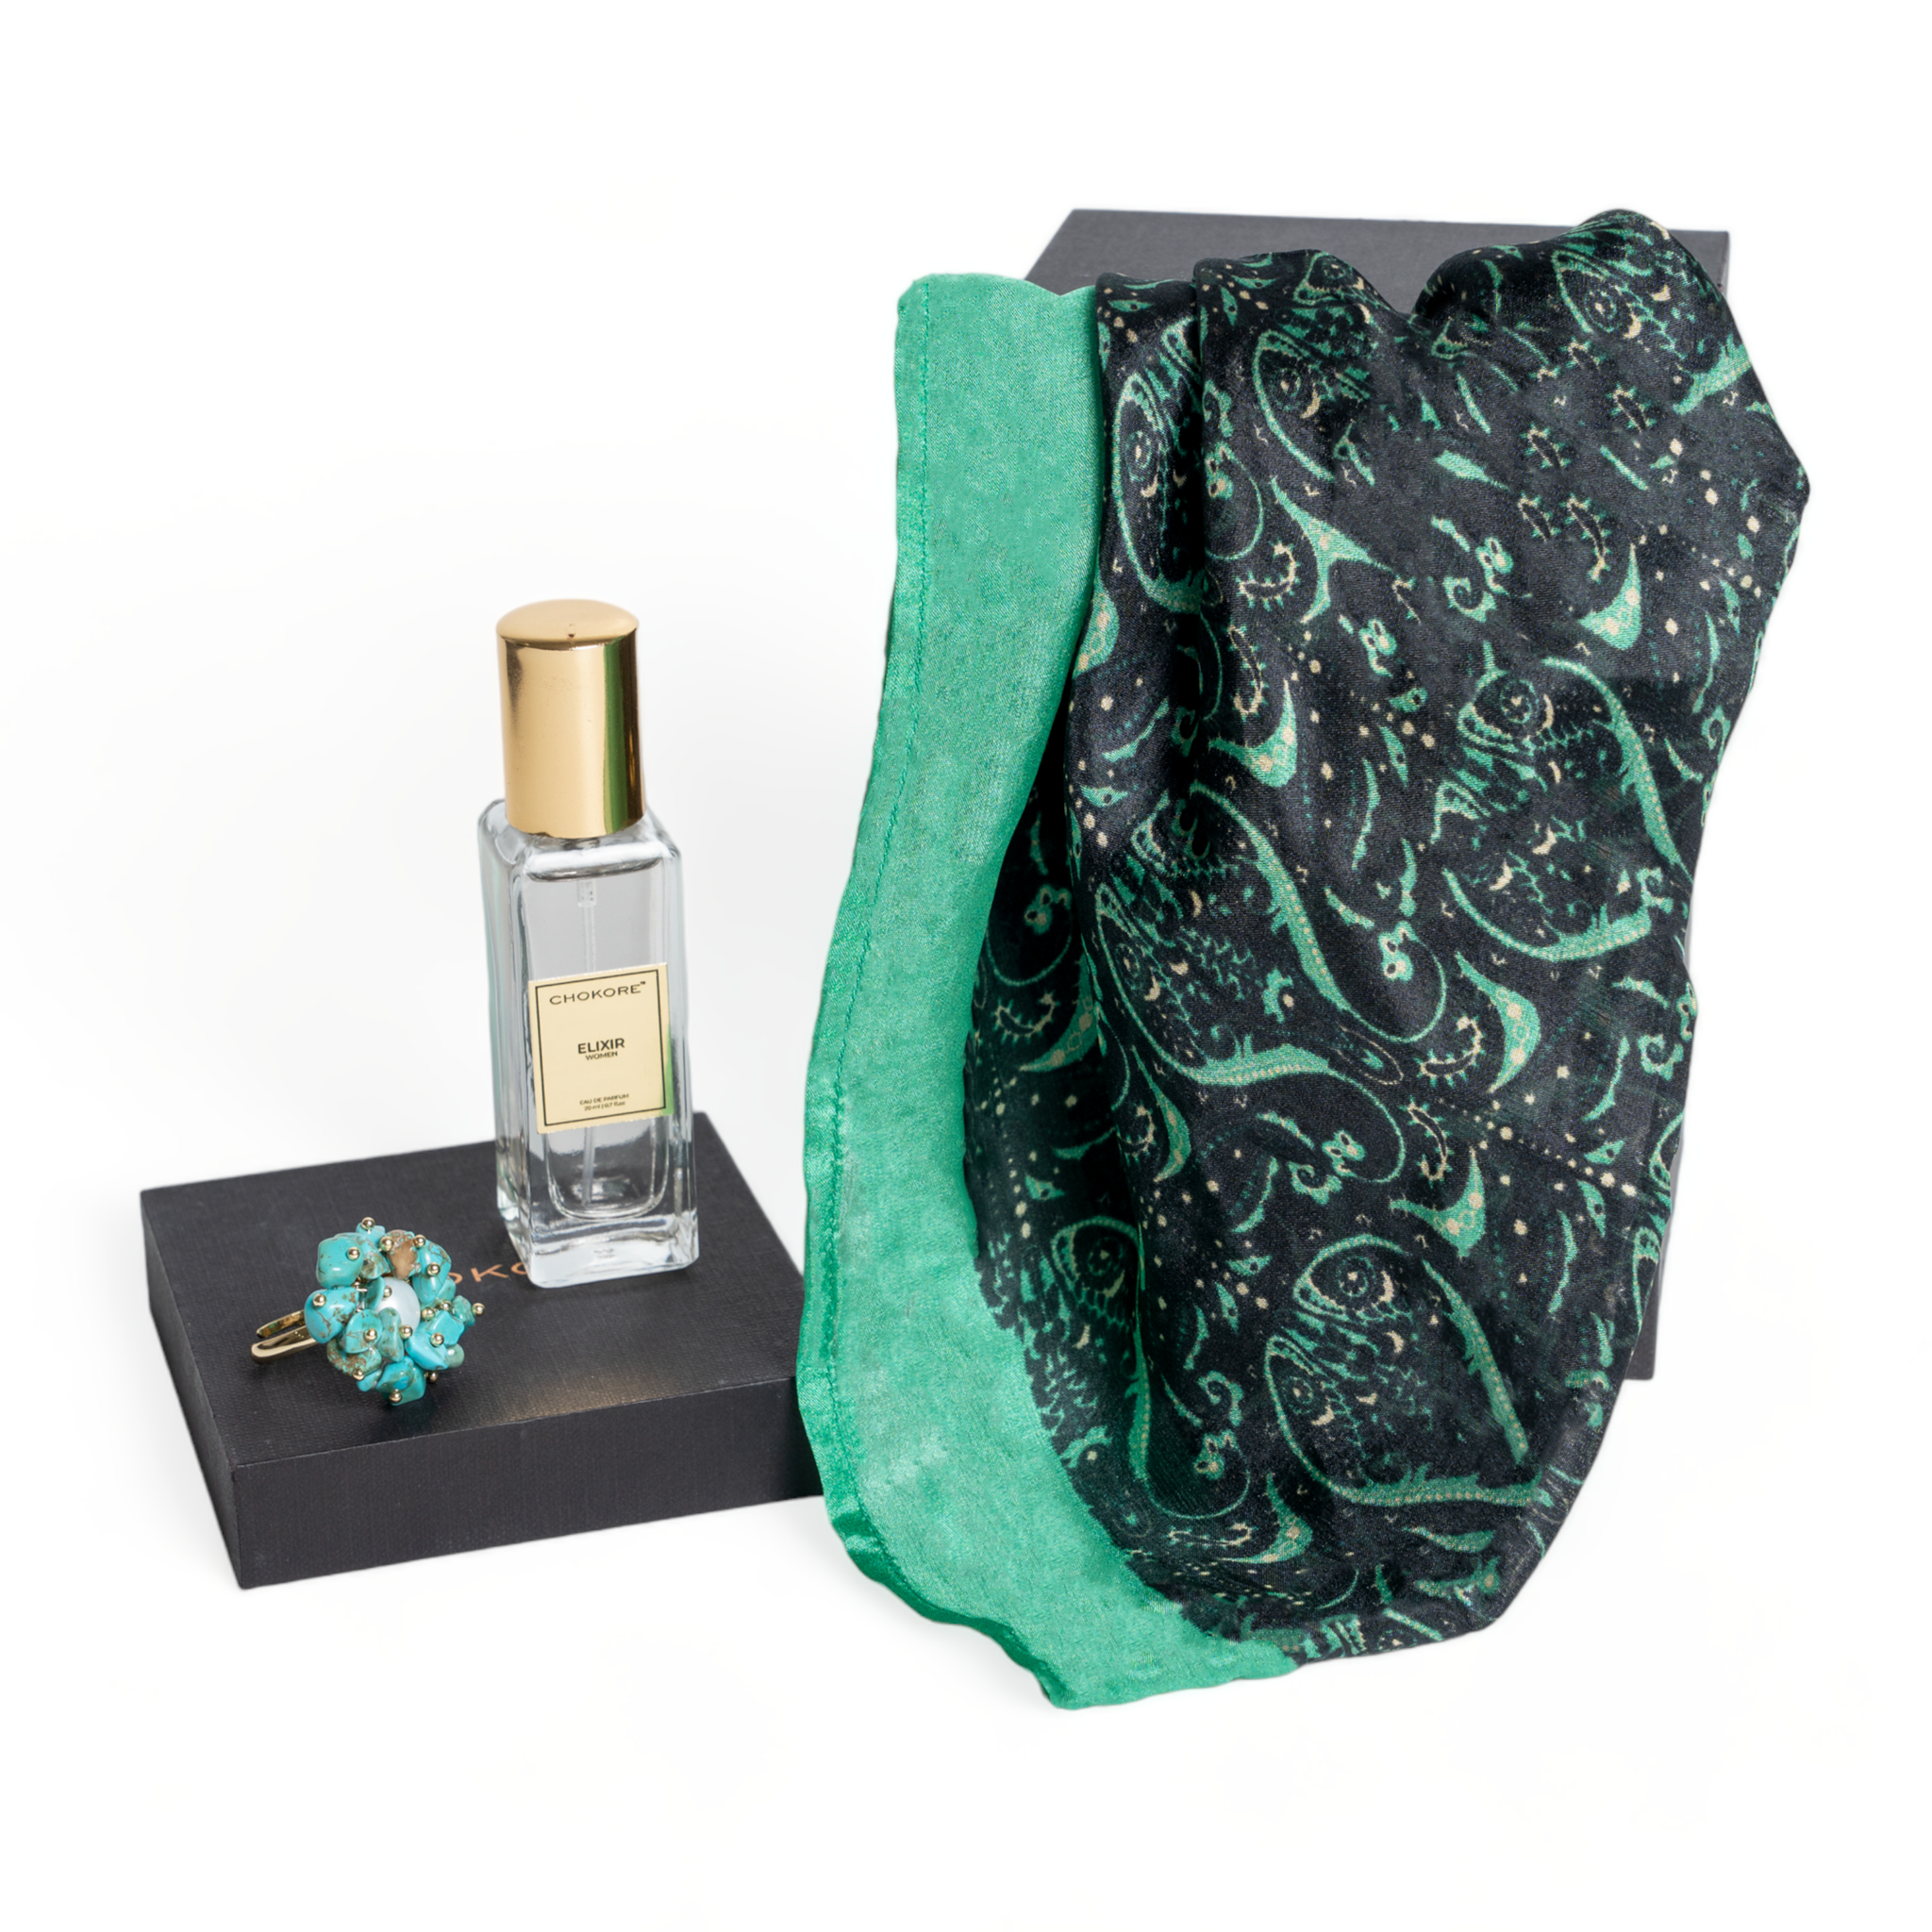 Chokore Special 3-in-1 Gift Set for Her (Silk Stole, Turquoise Stone Ring, & 20 ml Elixir Perfume)